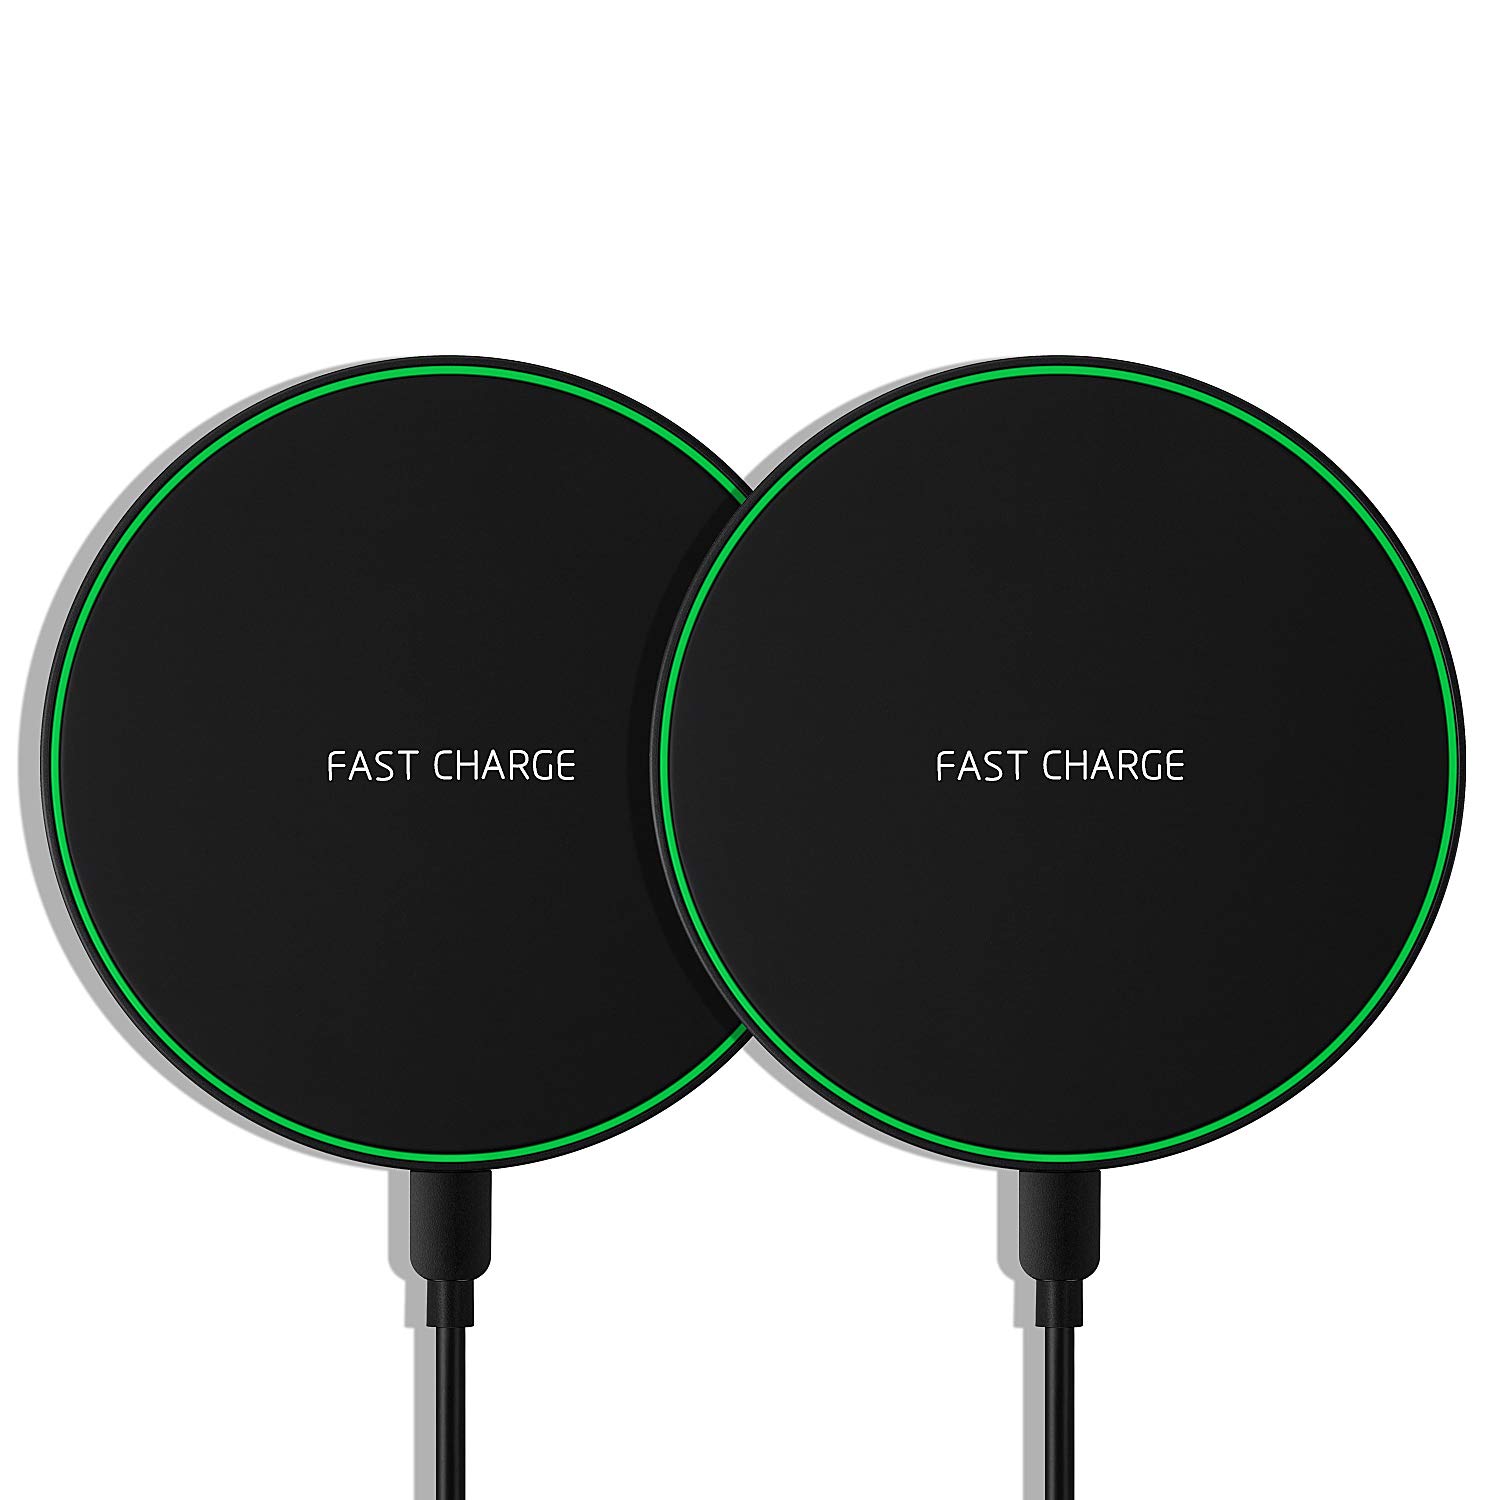 Book Cover Wireless Charger, 2Pack Canjoy 10W Max Fast Wireless Charging Pad Compatible with iPhone 11/11 Pro/11 Pro Max/XS Max/XS/X/8, Galaxy Note 10/Note 10 Plus/S10/S10 Plus/S10E(No AC Adapter)